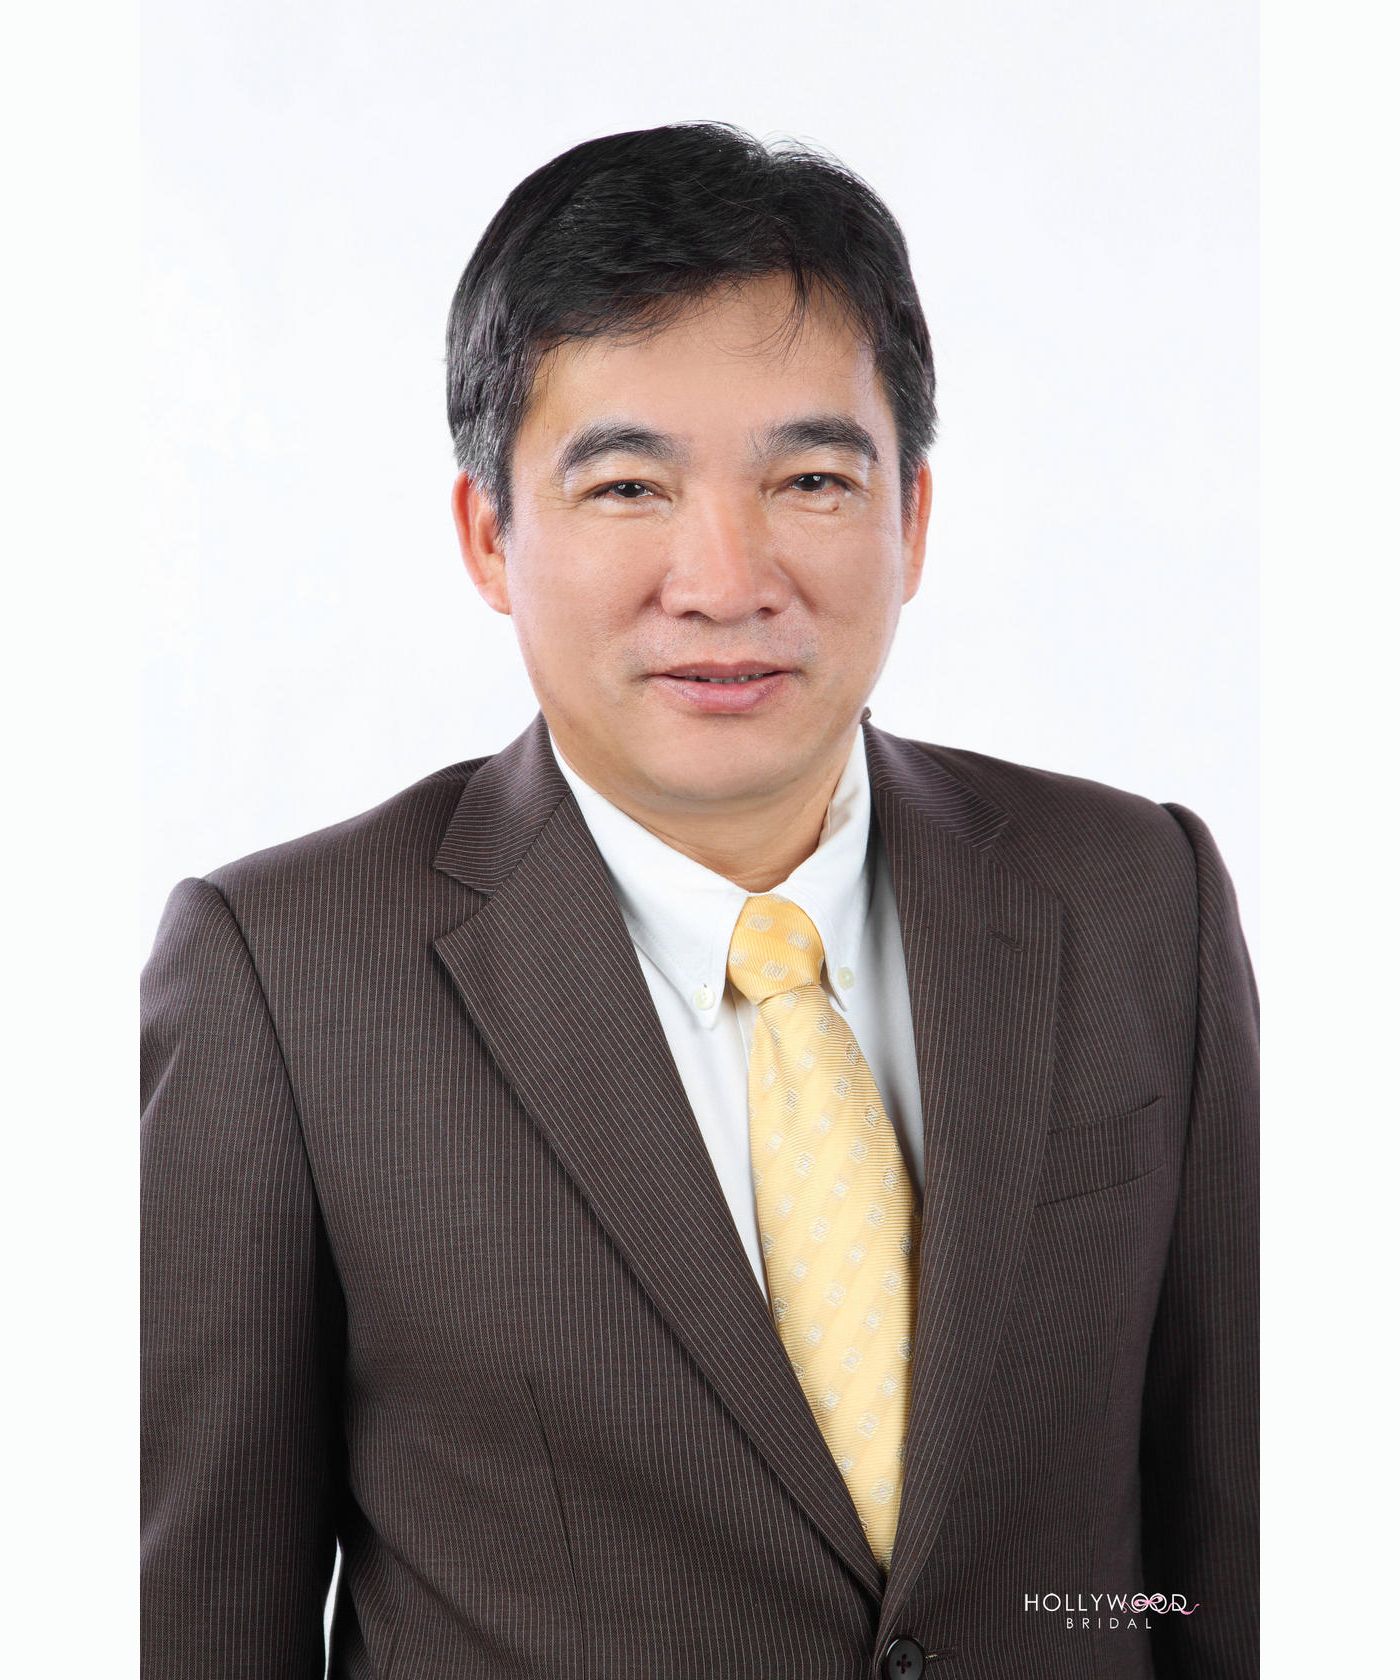 Aaron Toh, group managing director and CEO